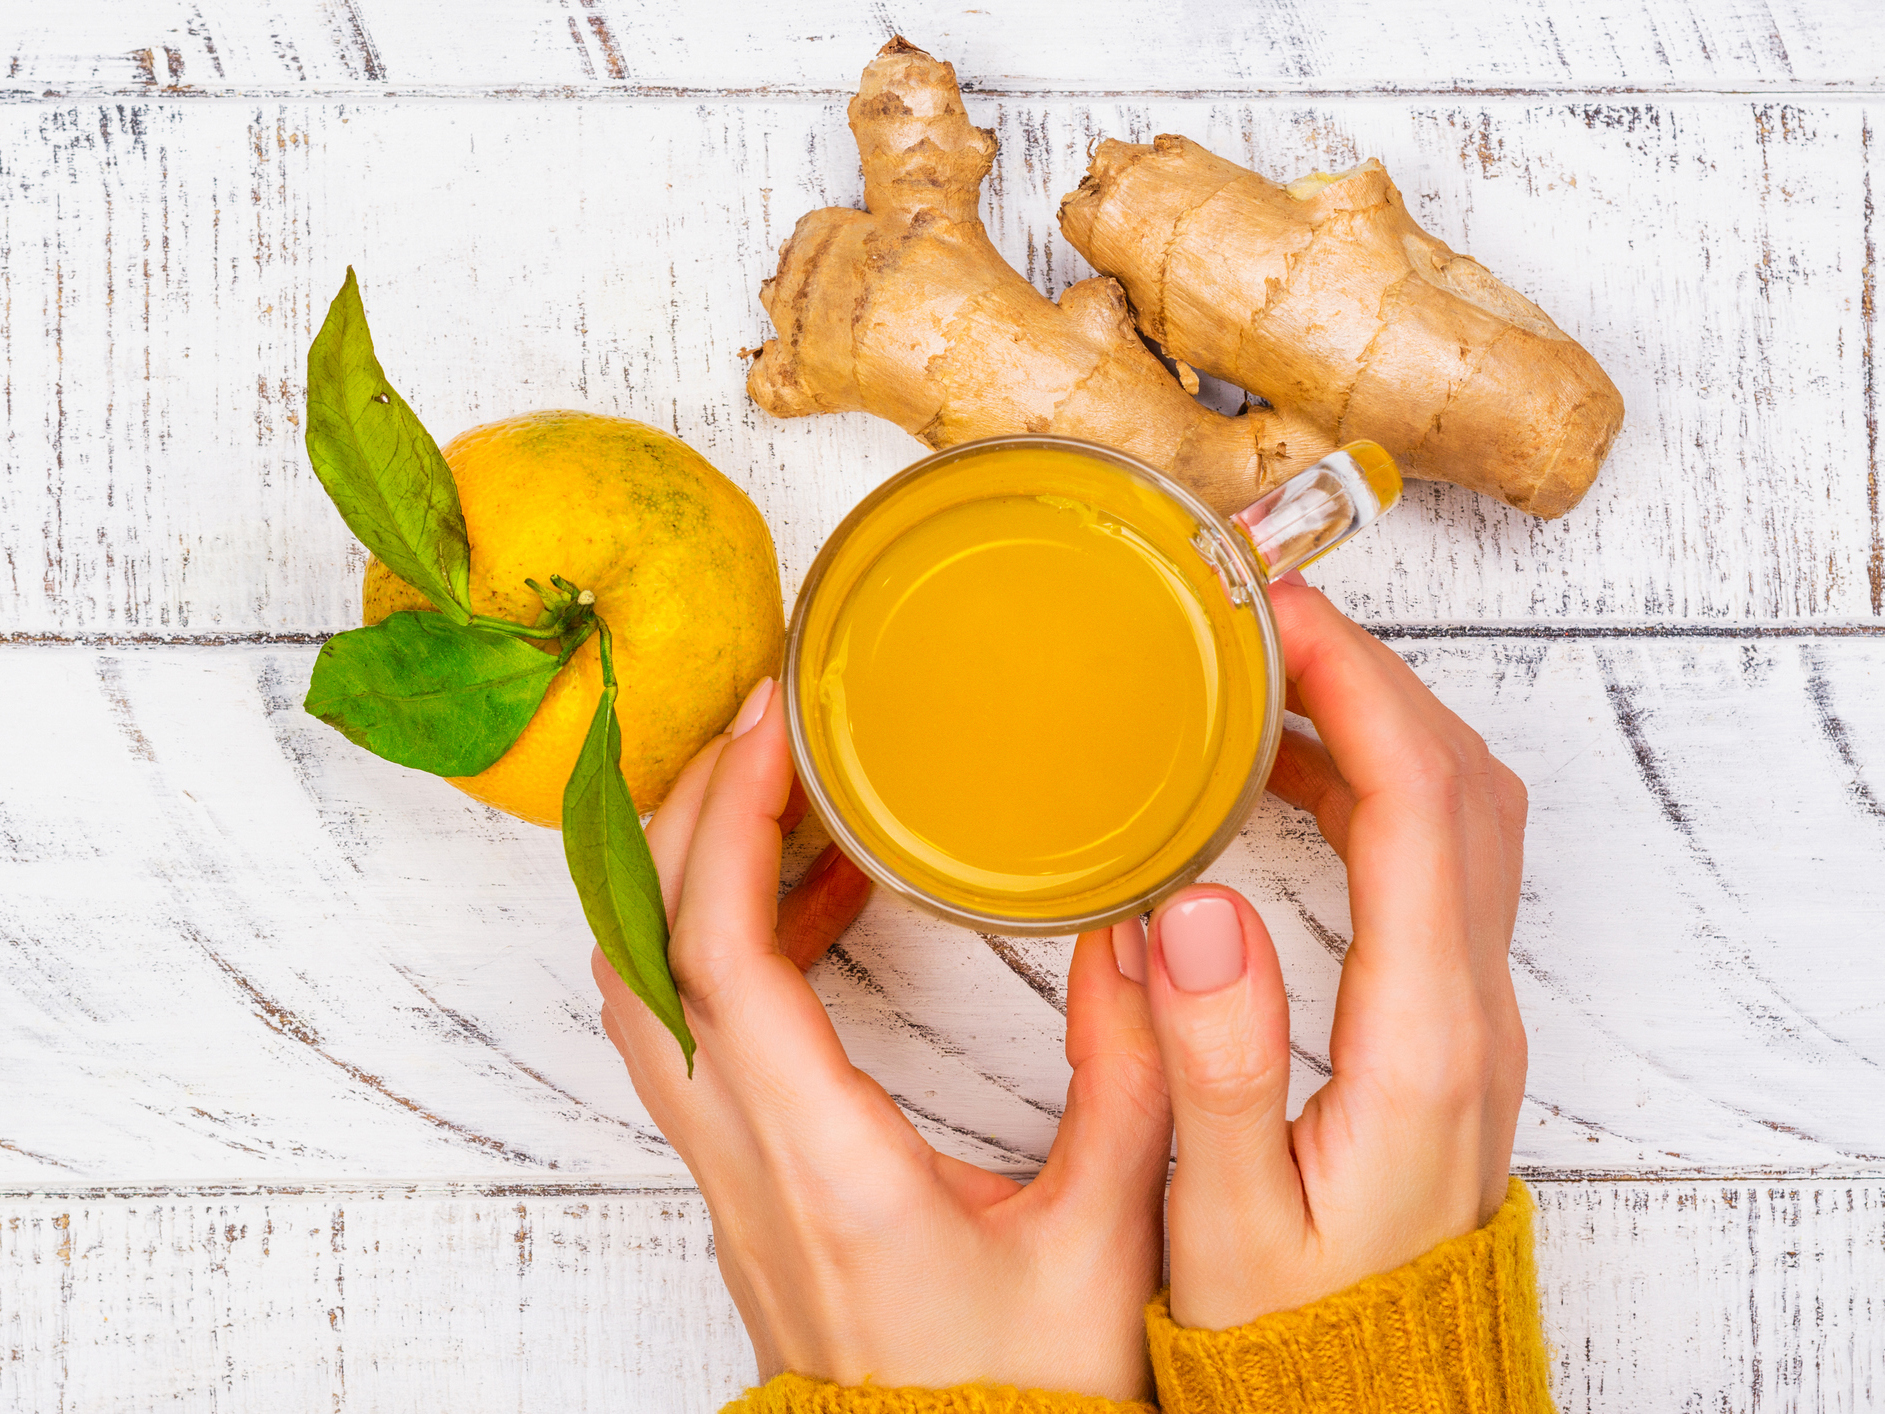 Ginger’s potential to ward of superbugs and other ways to avoid nosocomial infections